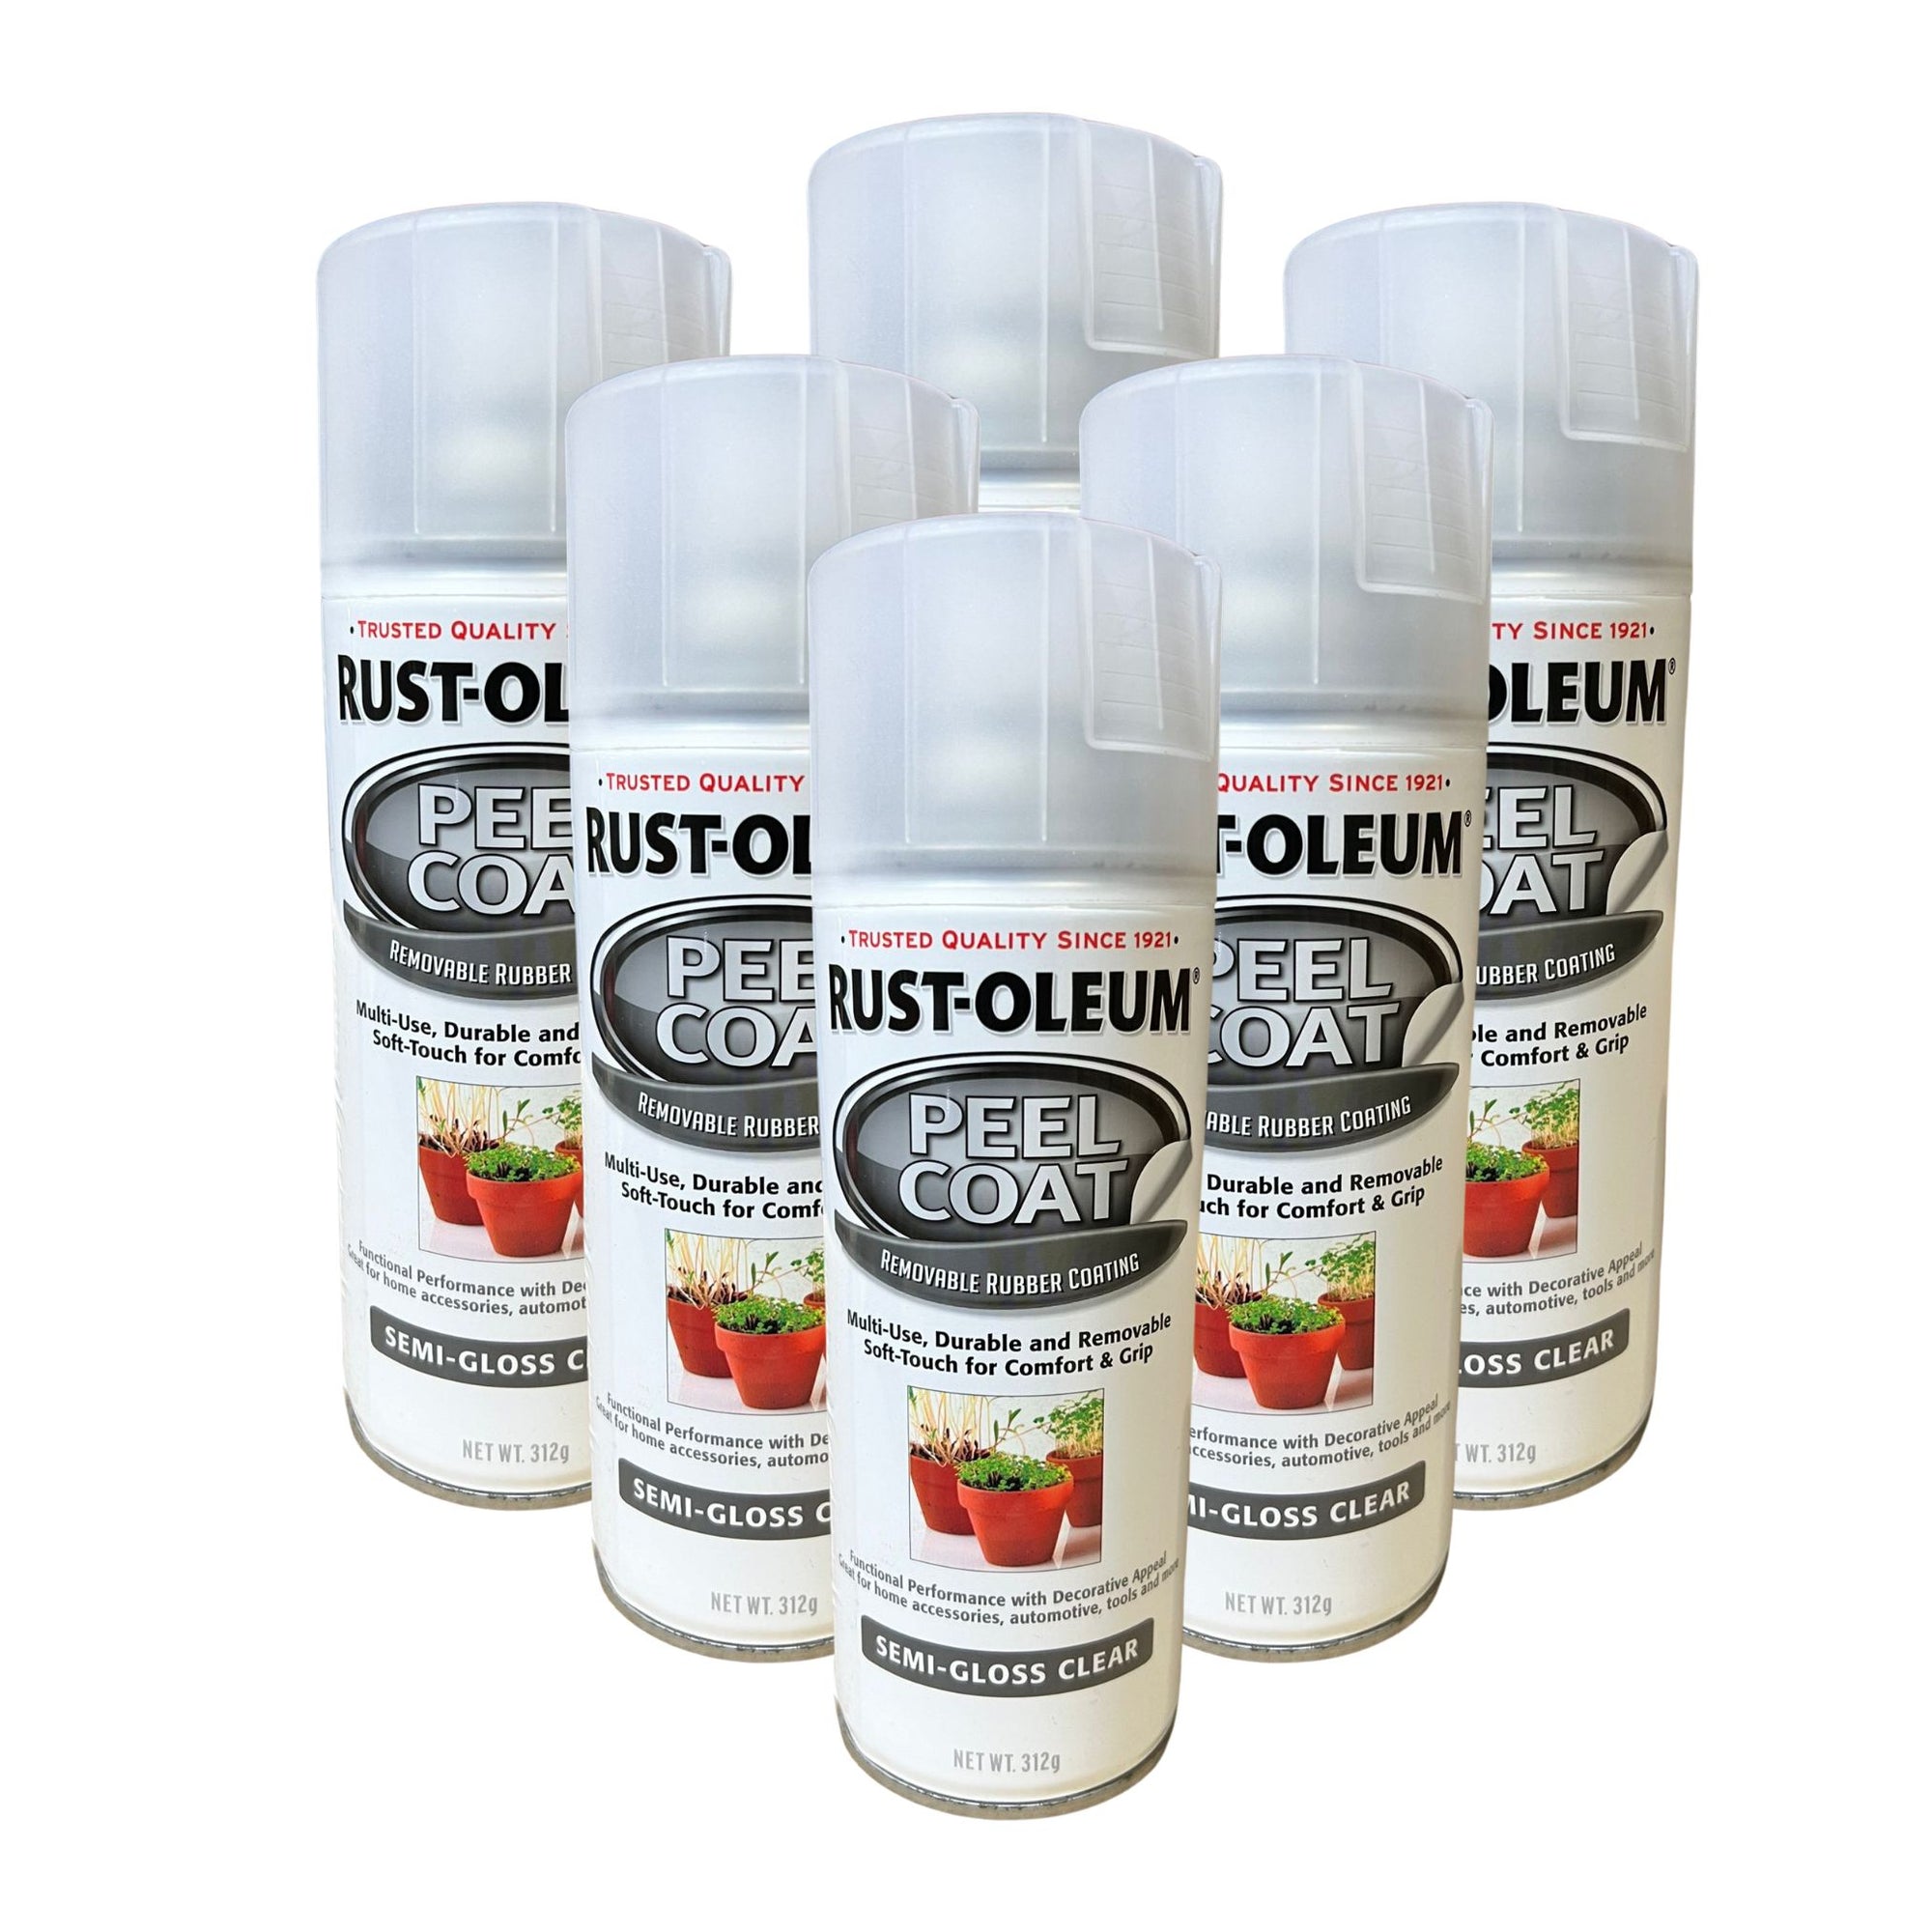 Rust-Oleum Peel Coat Rubberized Removable Coating Semi-Gloss Clear - South East Clearance Centre